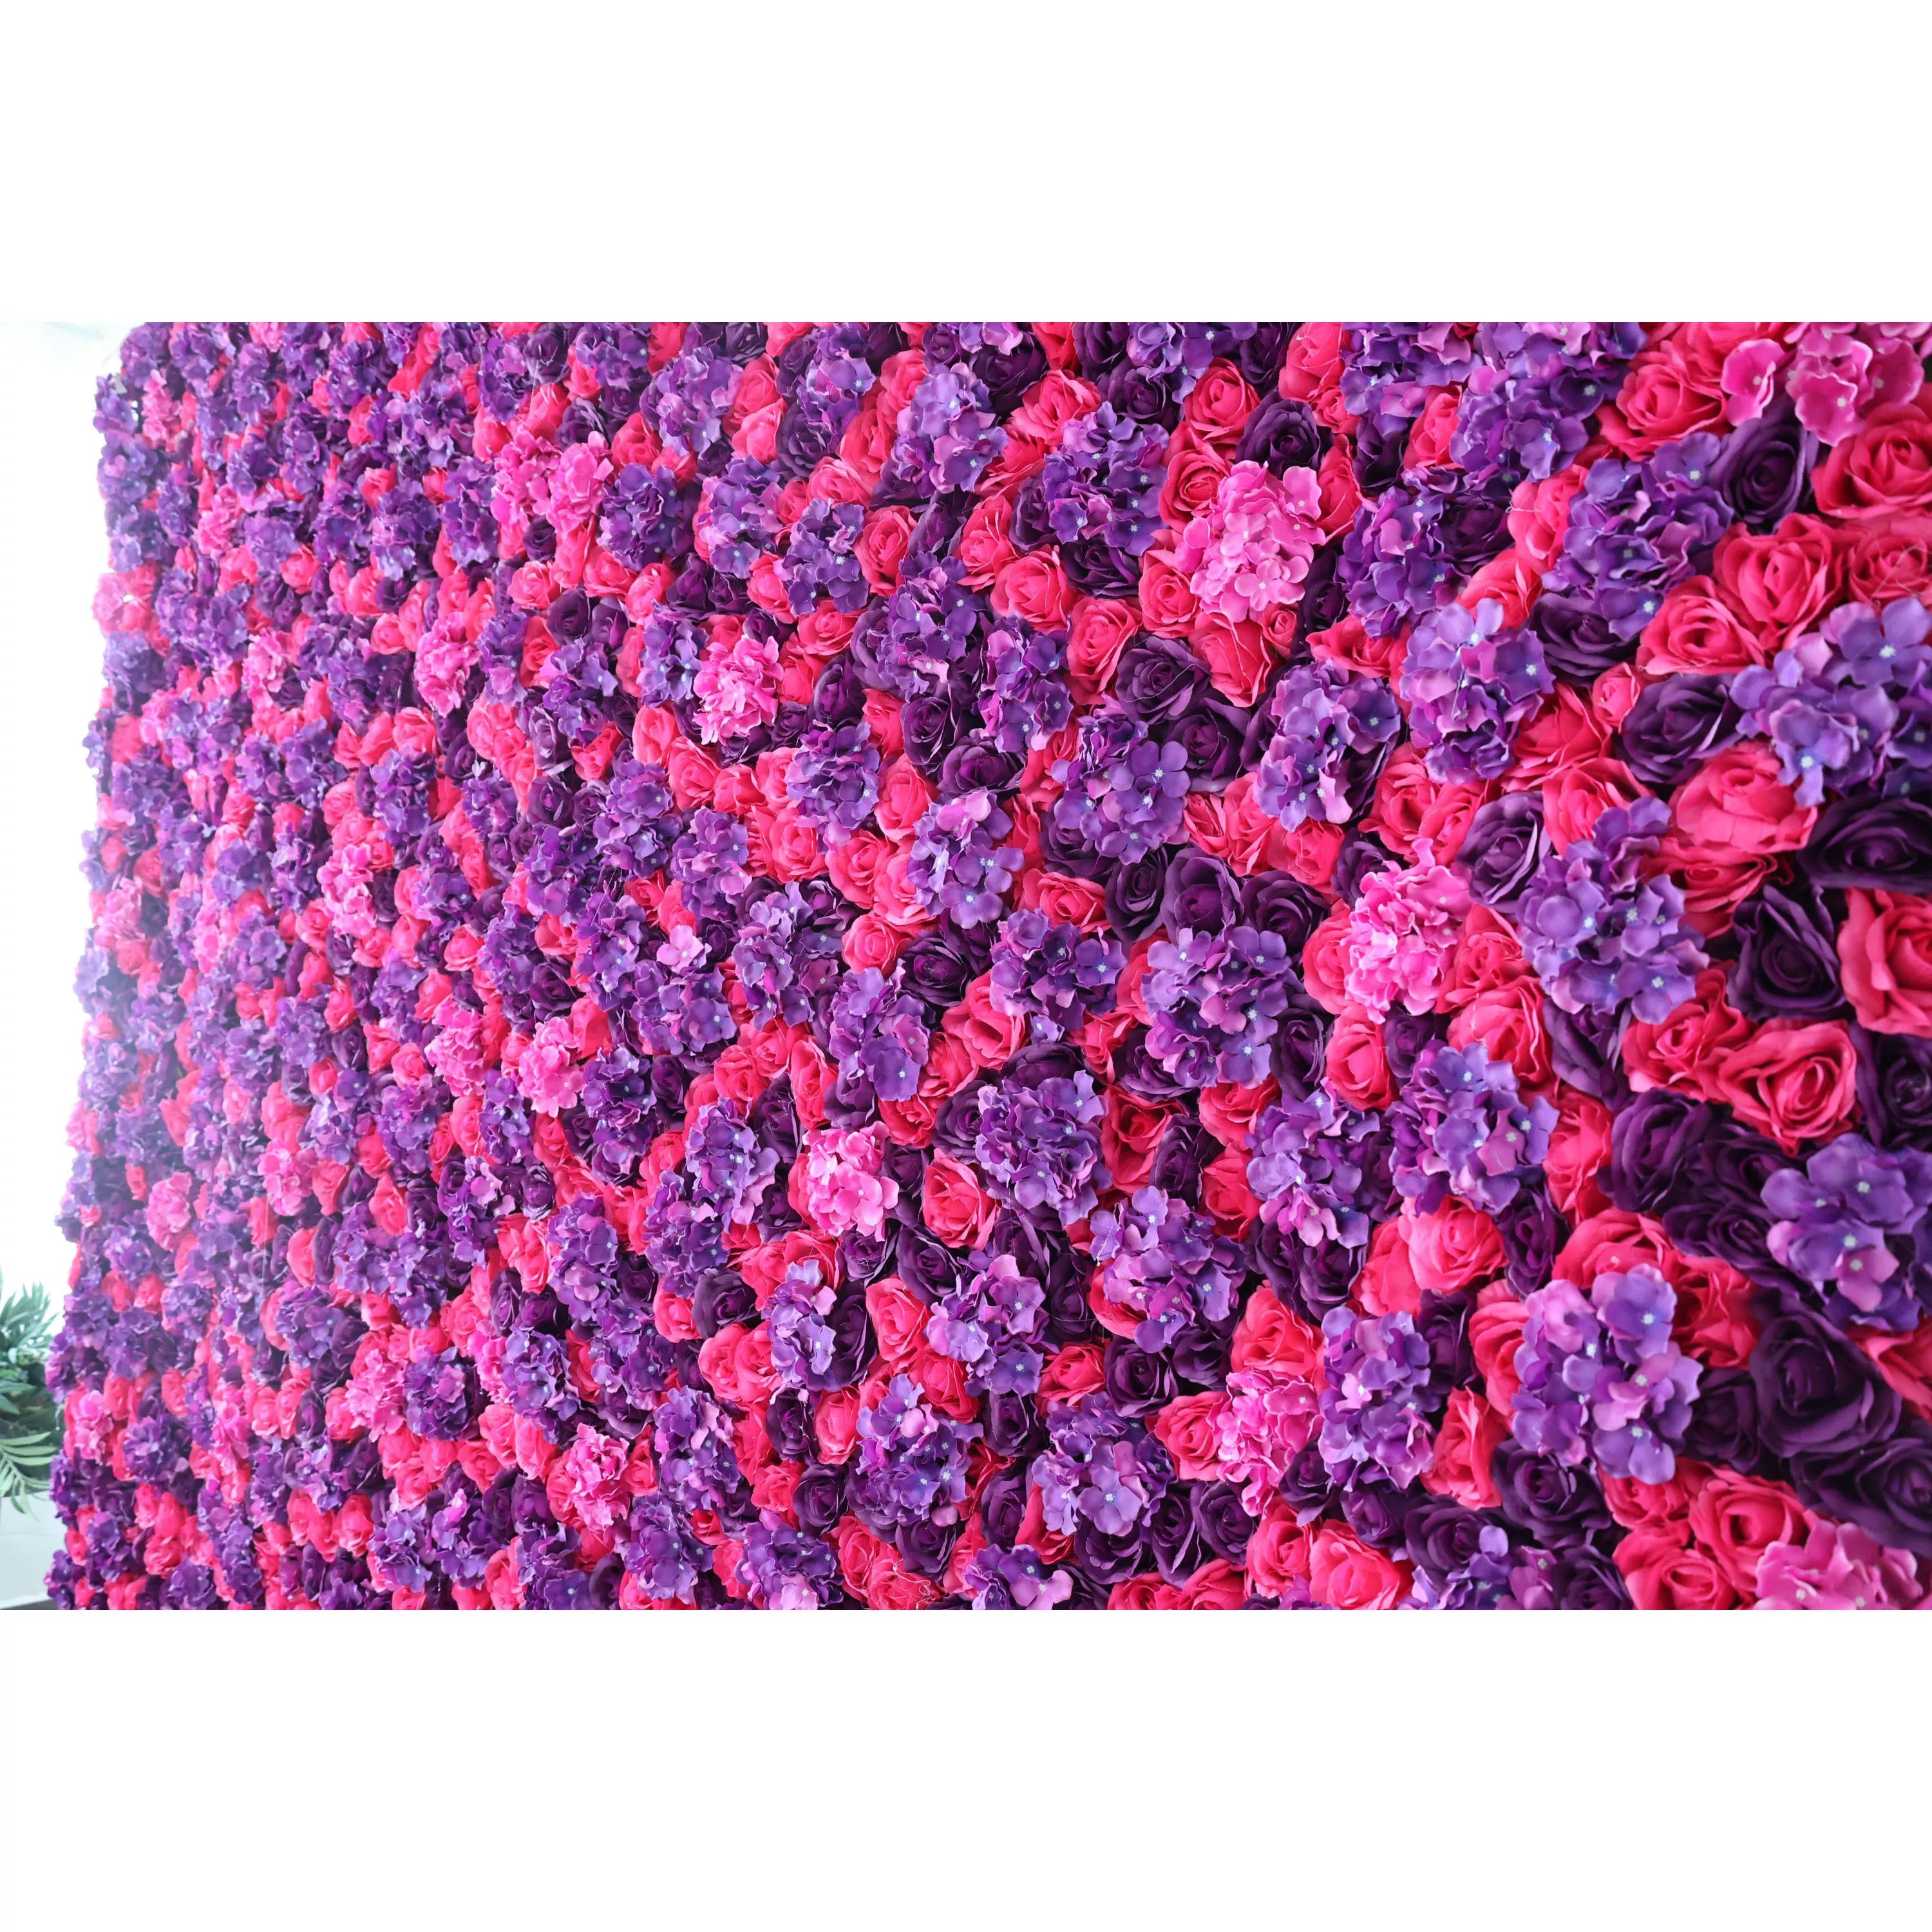 ValarFlowers Artificial Floral Wall Backdrop: The Passionate Spectrum - A Mesmerizing Medley of Deep Reds and Purples-VF-273-2